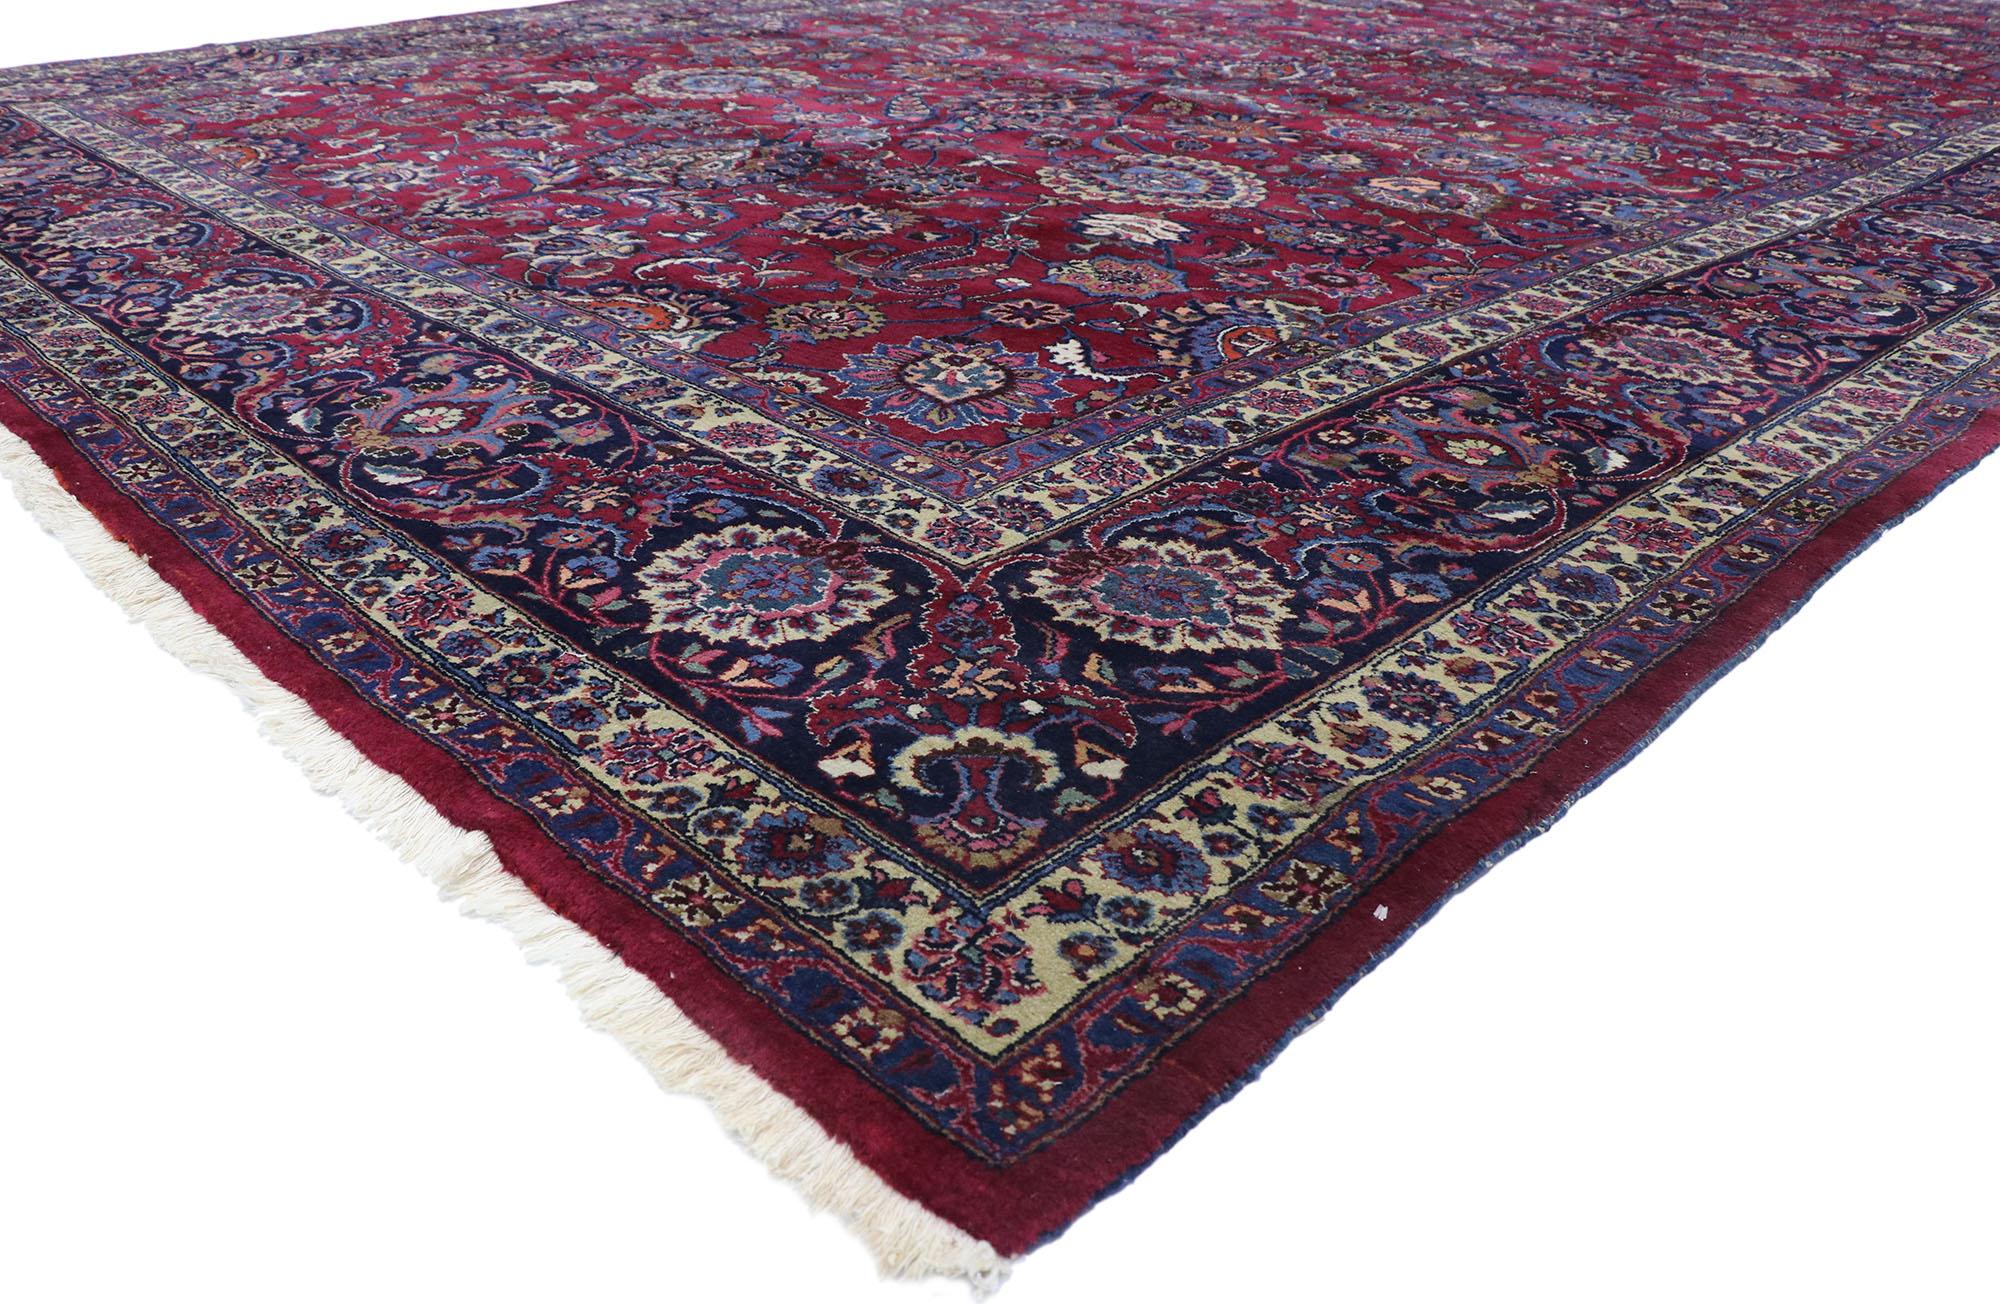 78066 antique Persian Mashhad rug with Victorian Elizabethan style 12'00 x 19'07. With its beguiling beauty and rich jewel-tones, this hand-knotted wool antique Persian Mashhad rug is poised to impress. The abrashed burgundy field is covered with a